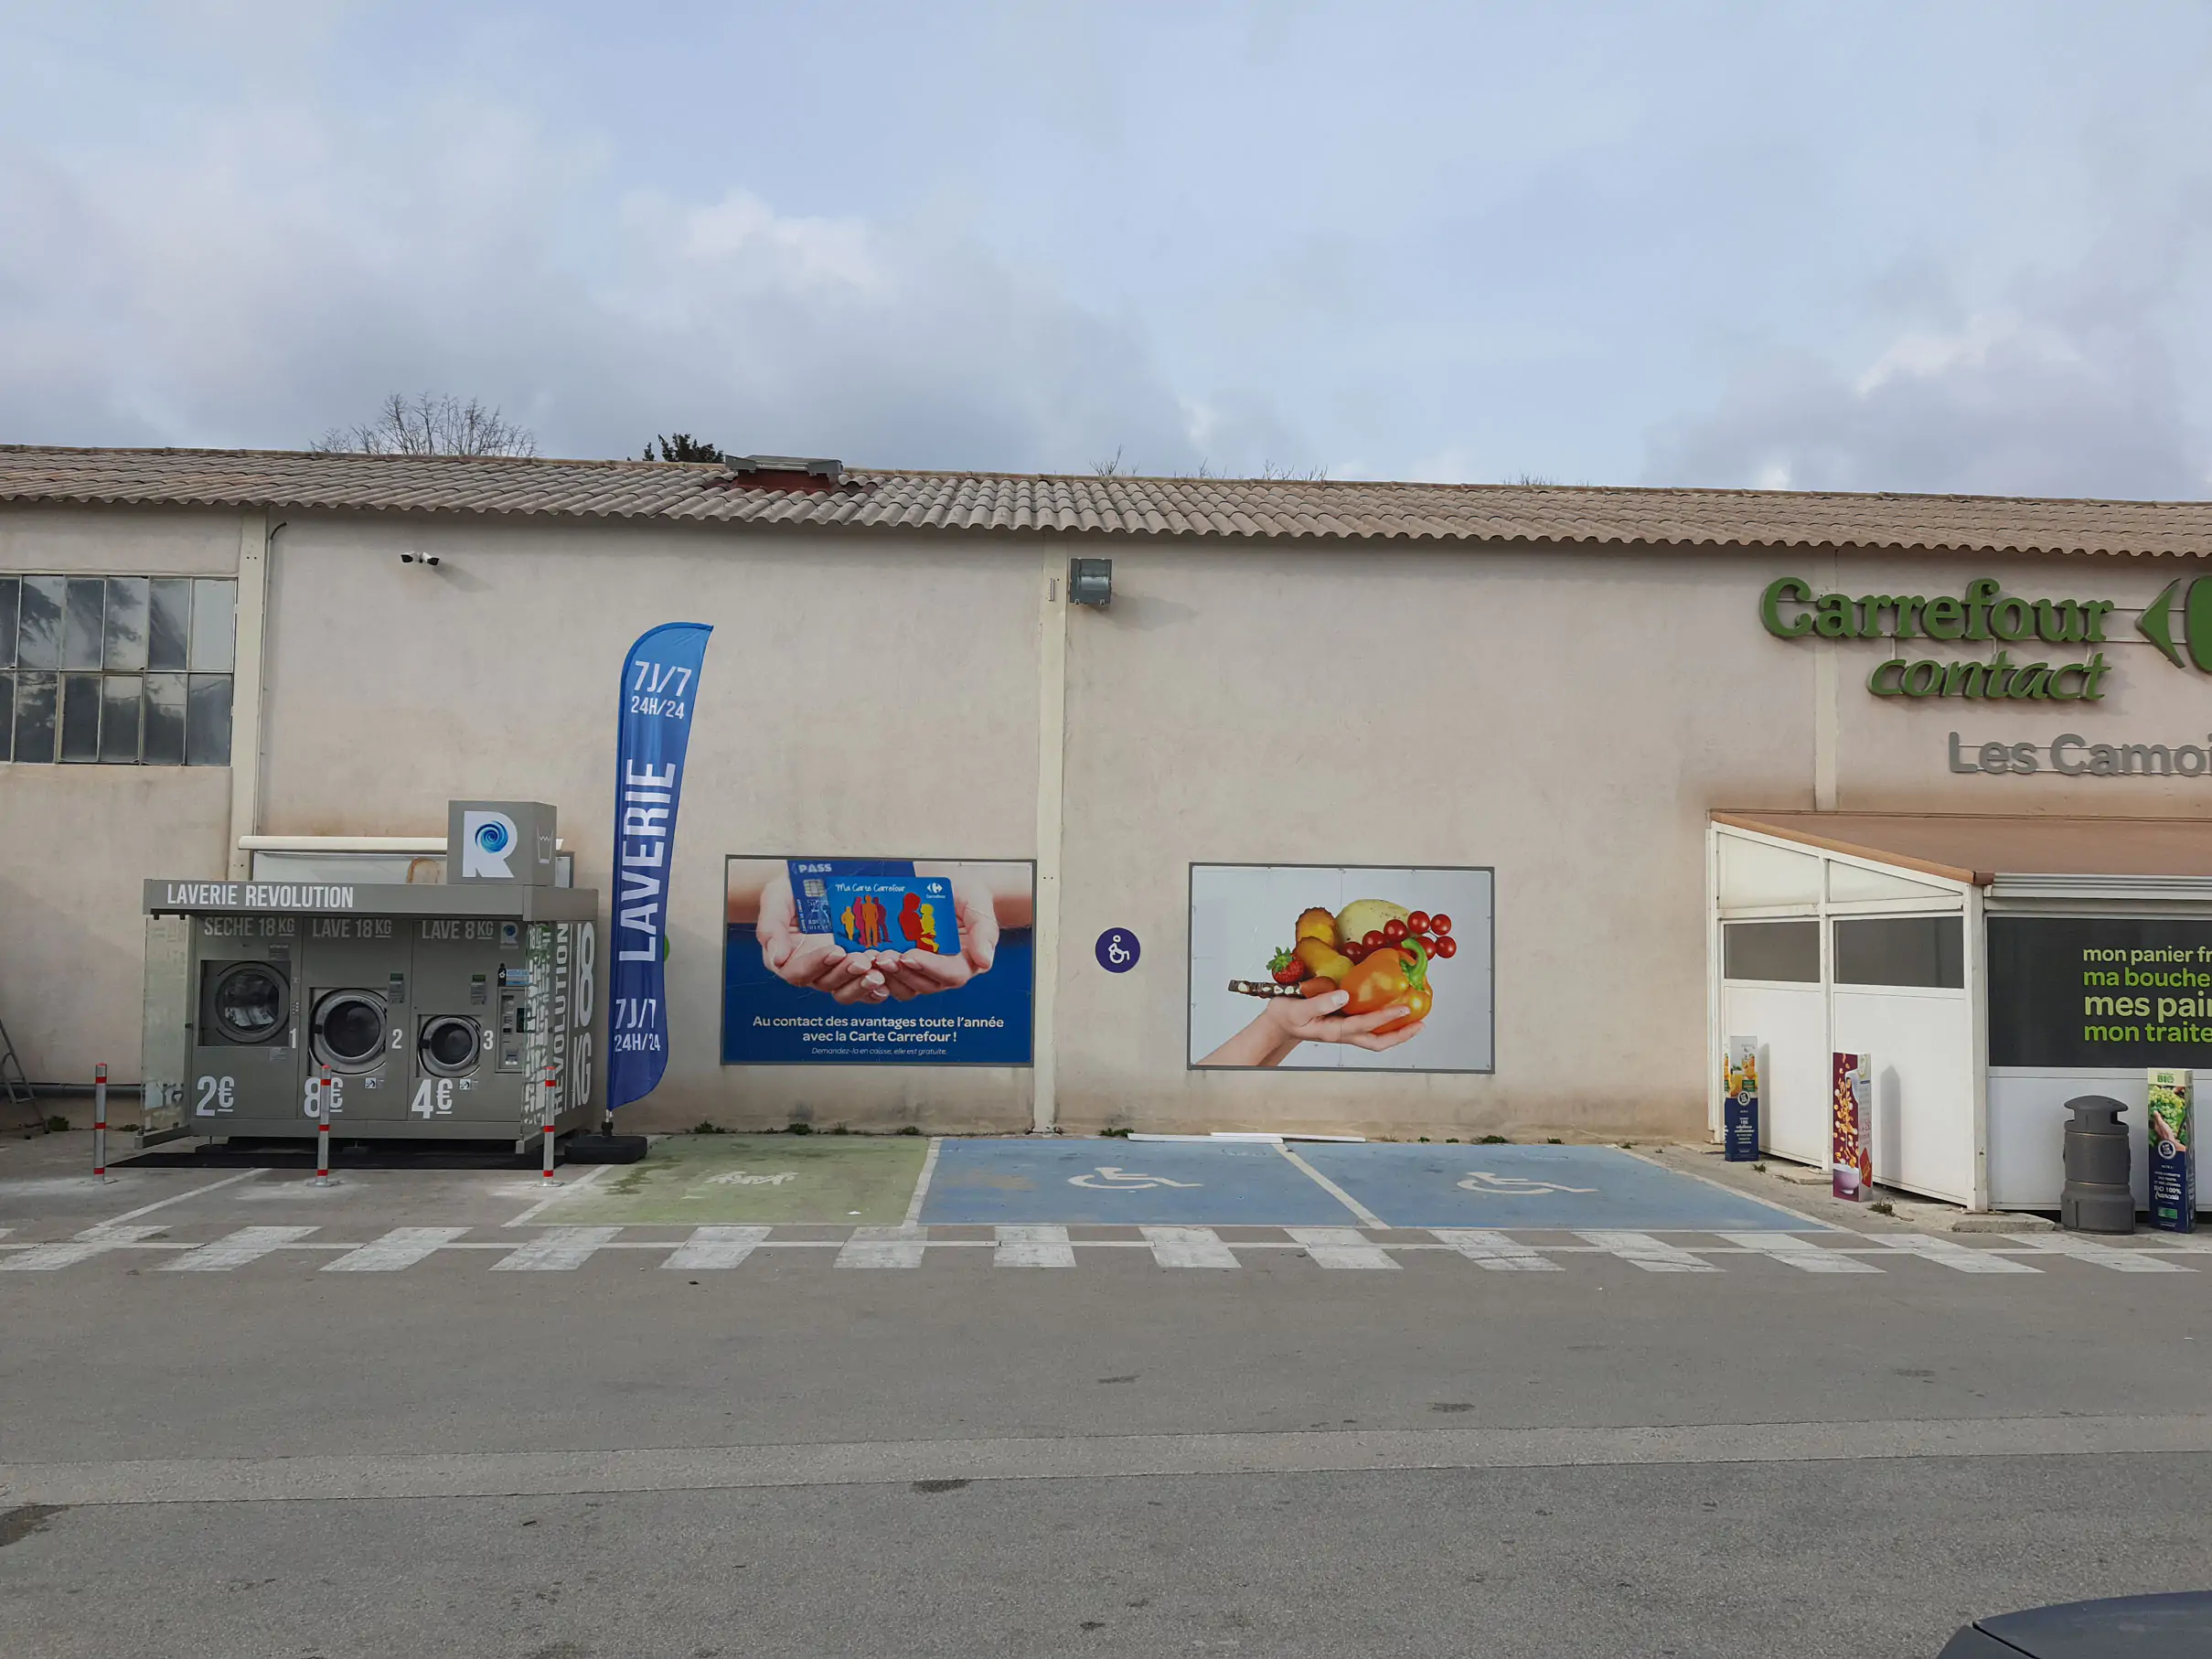 Marseille-Carrefour-Contact-Les-Camoins.jpg